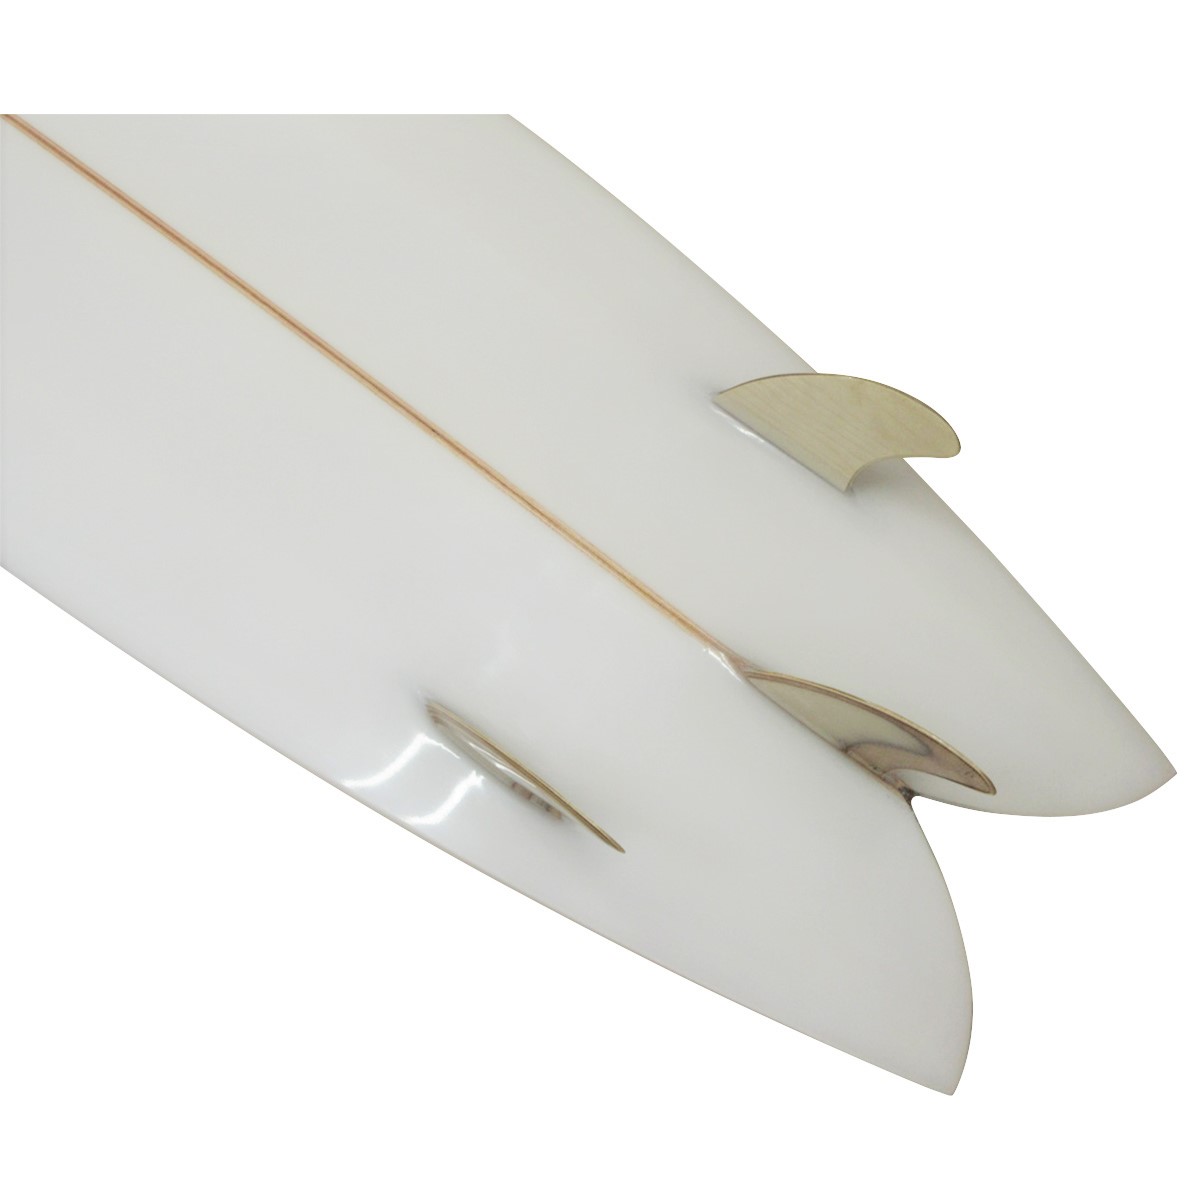 MICHAEL MILLER SURFBOARDS / Fish Simmons 9`6